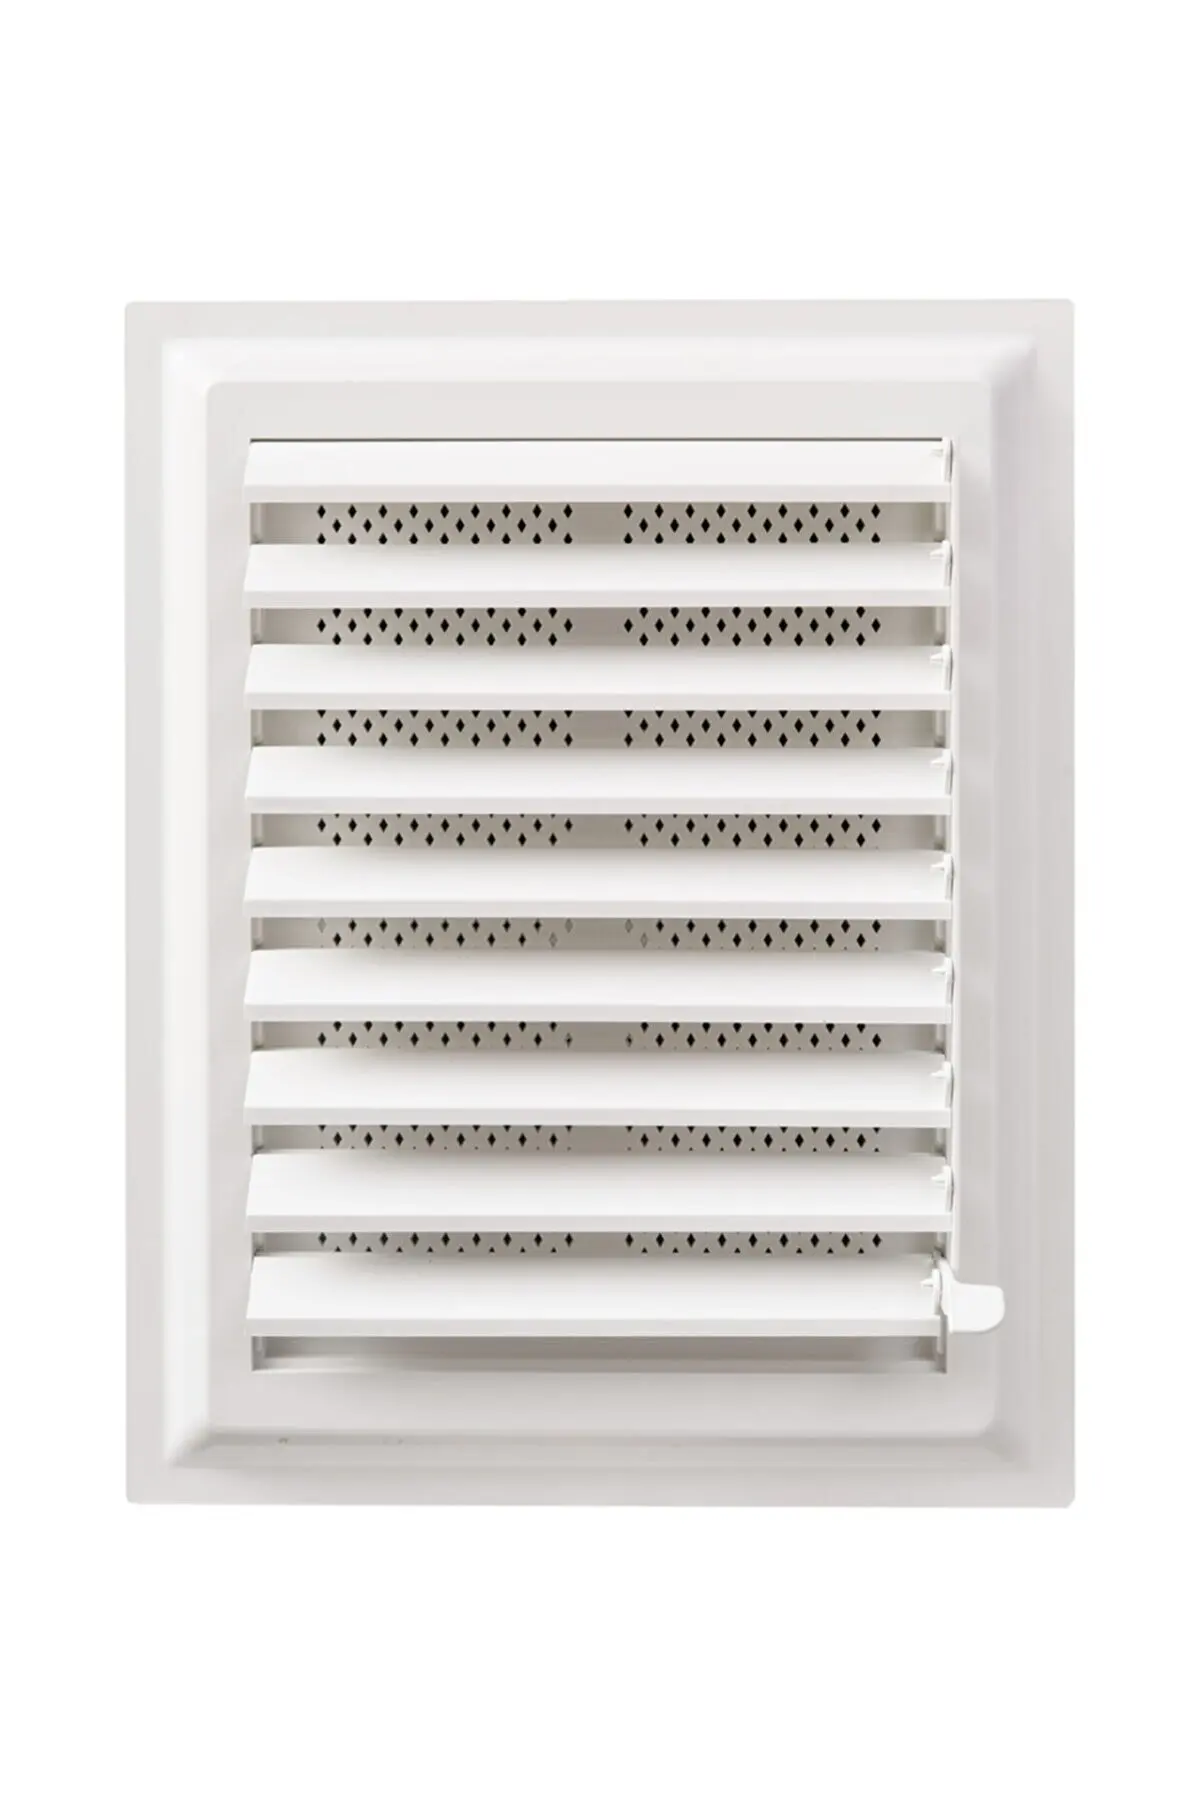 

Plastic Bathroom Wc Ventilation Grille Shallow Moving Blinds Bathroom Blind with Fly Screen HAS THE FEATURE OF WHITE OUTER SIDE